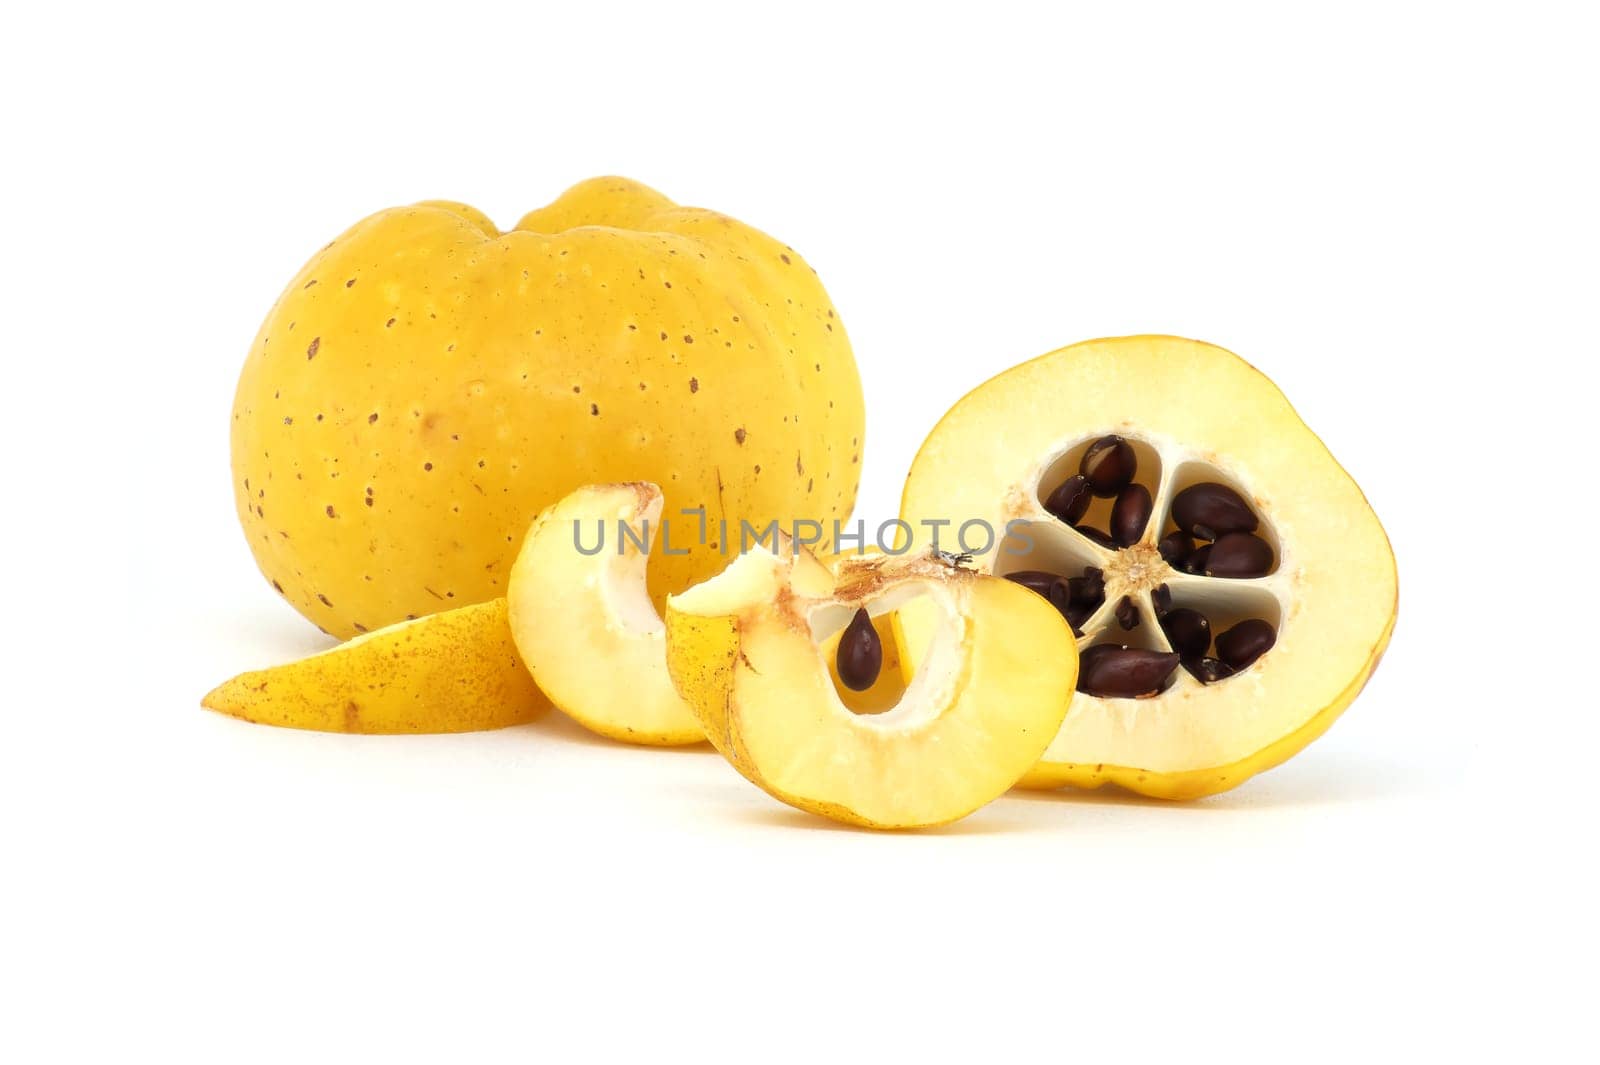 Vibrant quince fruits, both sliced and whole isolated on white background, full depth of field, Chaenomeles japonica or Japanese quince